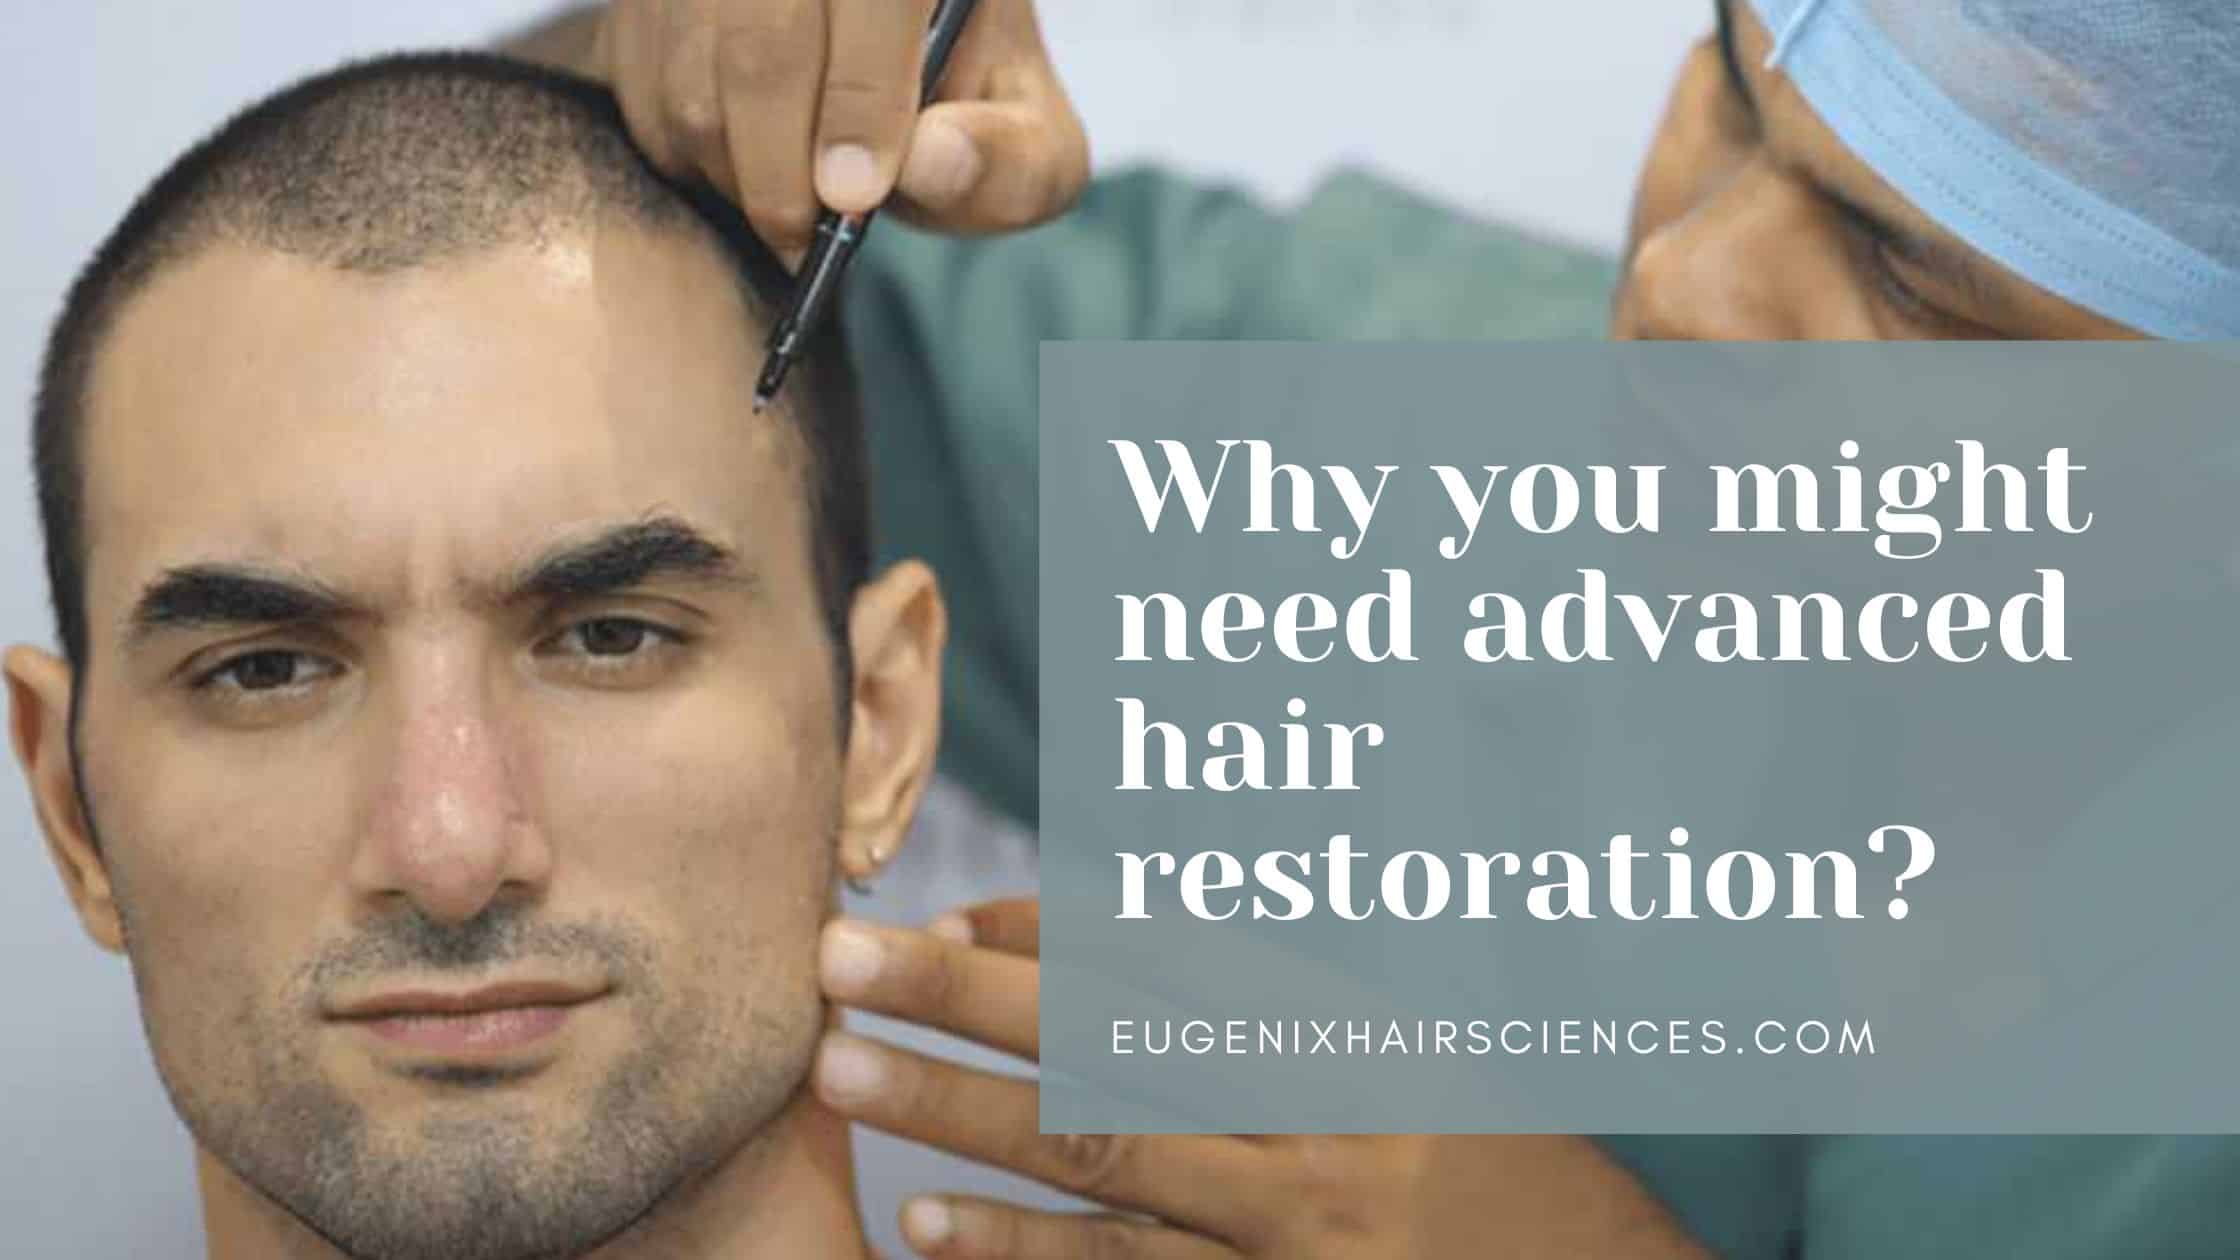 Why You Might Need Advanced Hair Restoration?